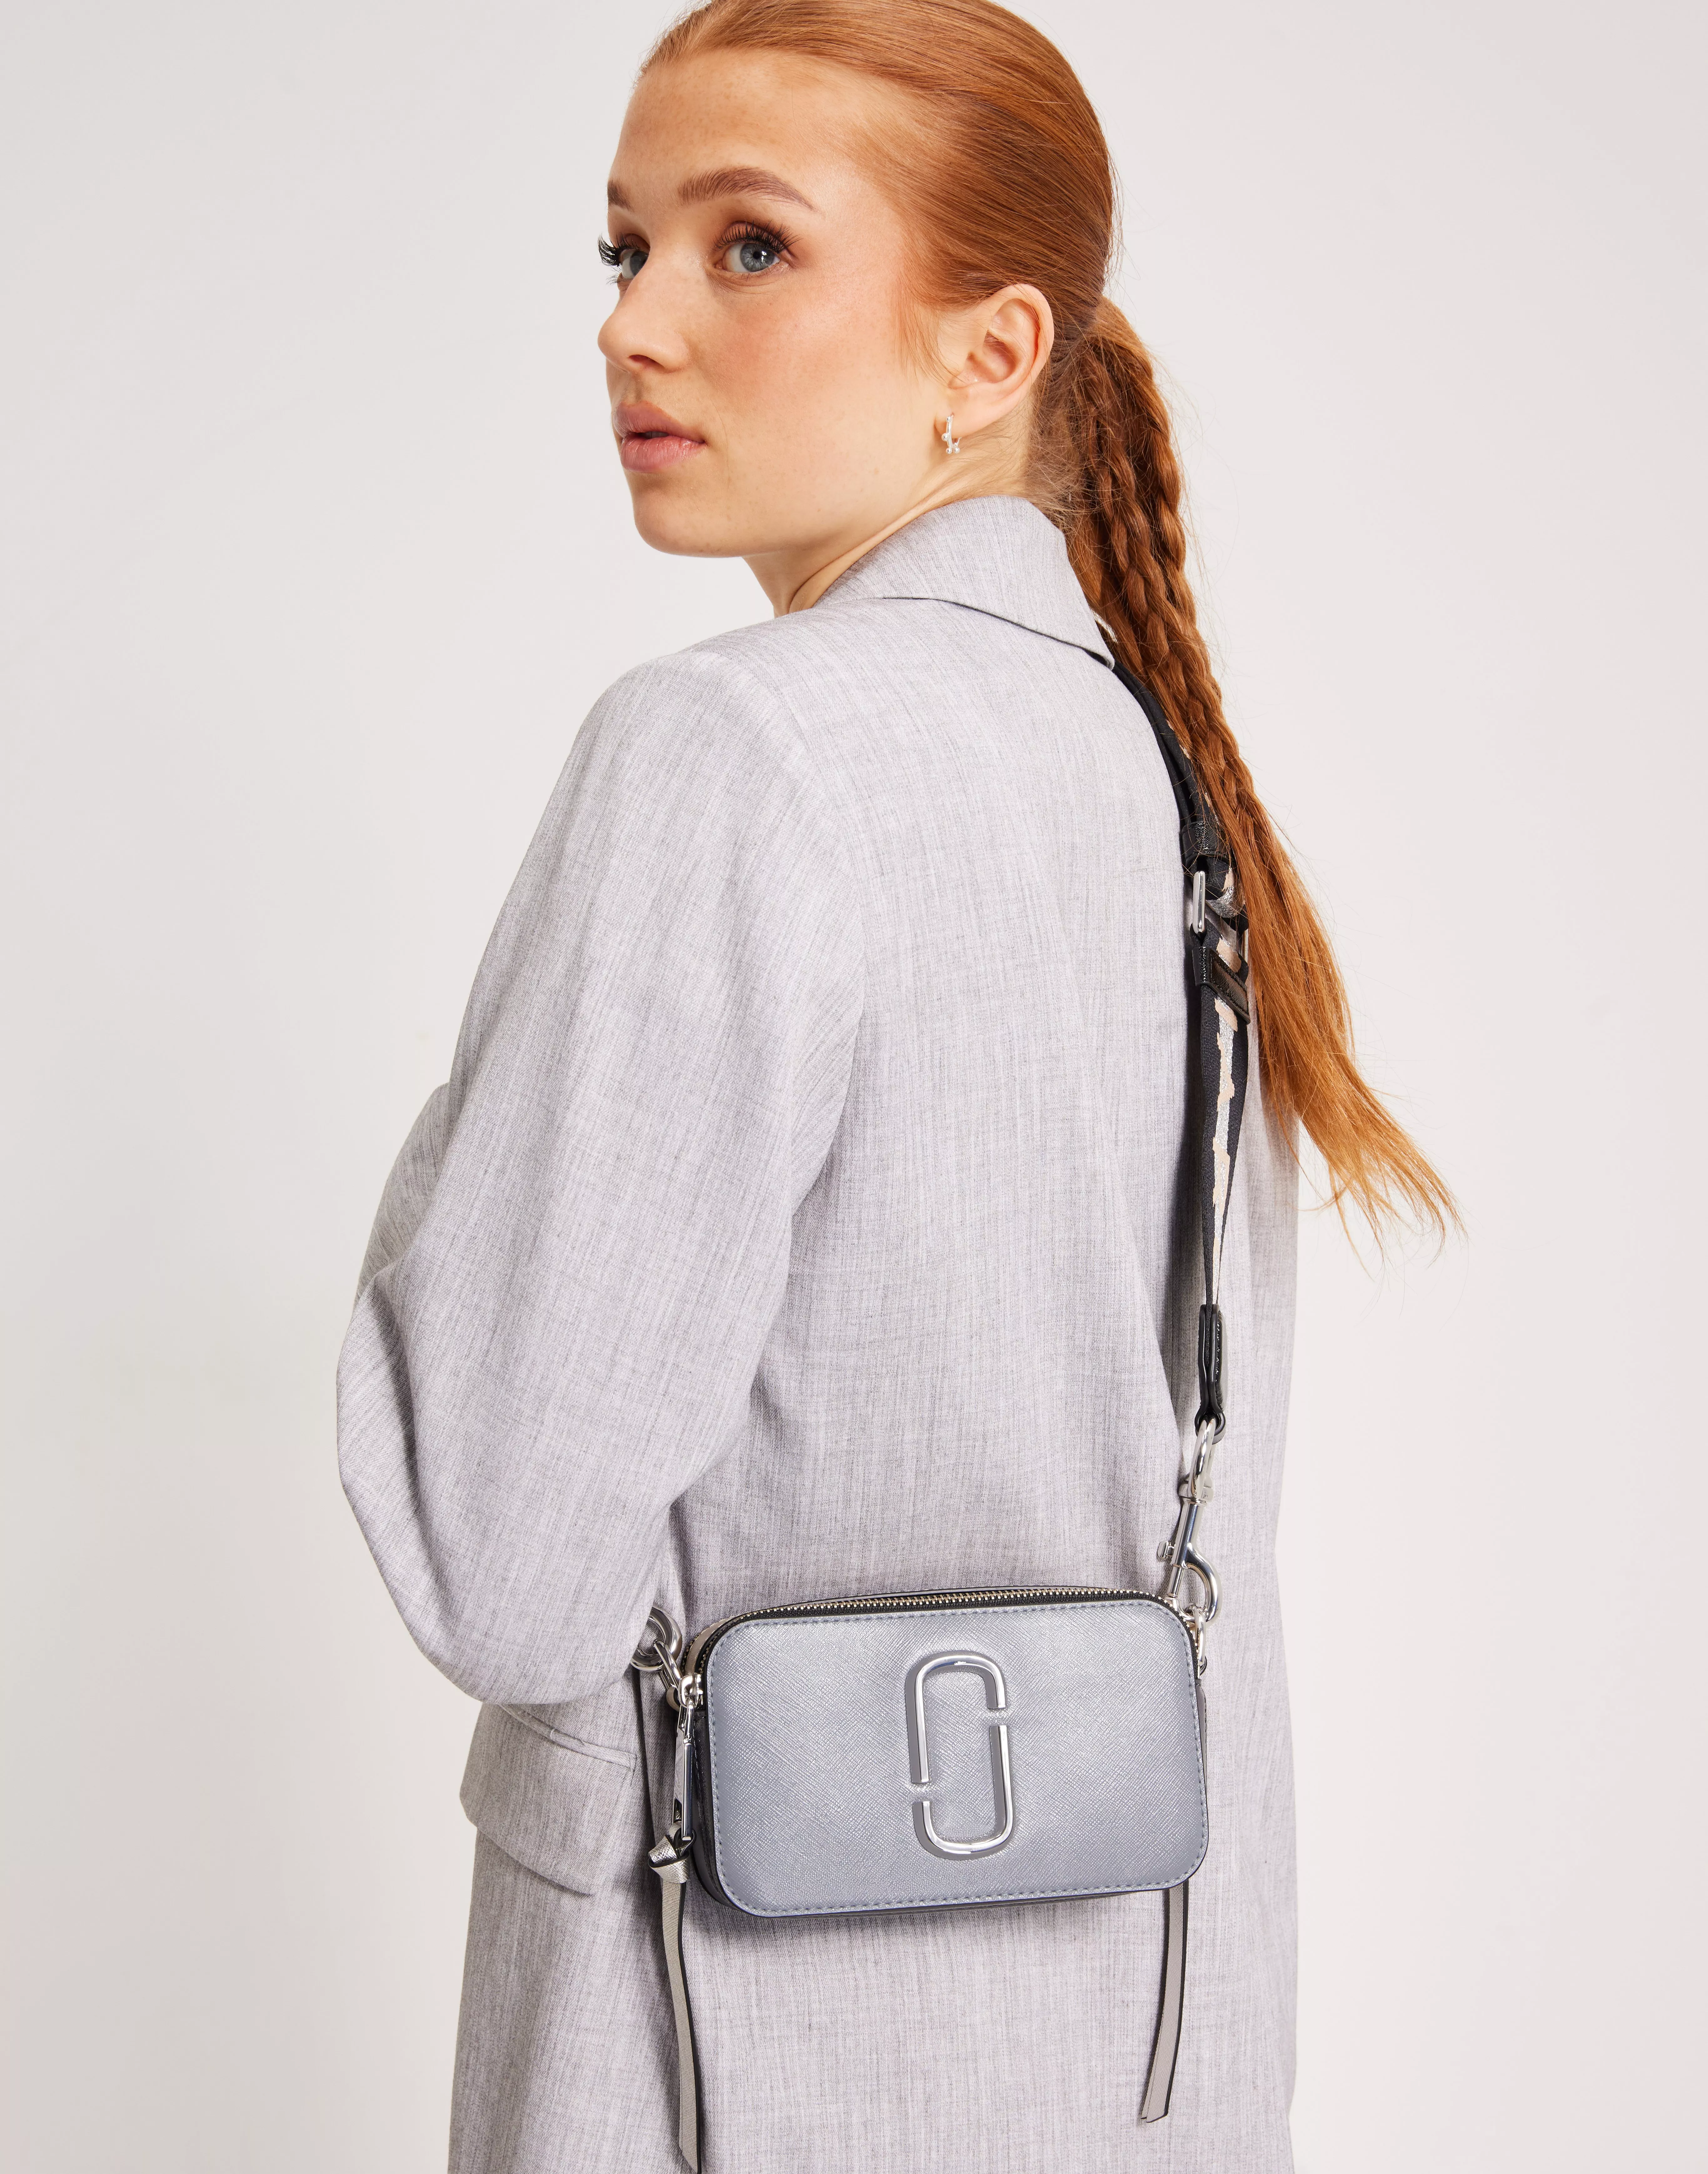 The Snapshot Leather Camera Bag in Grey - Marc Jacobs